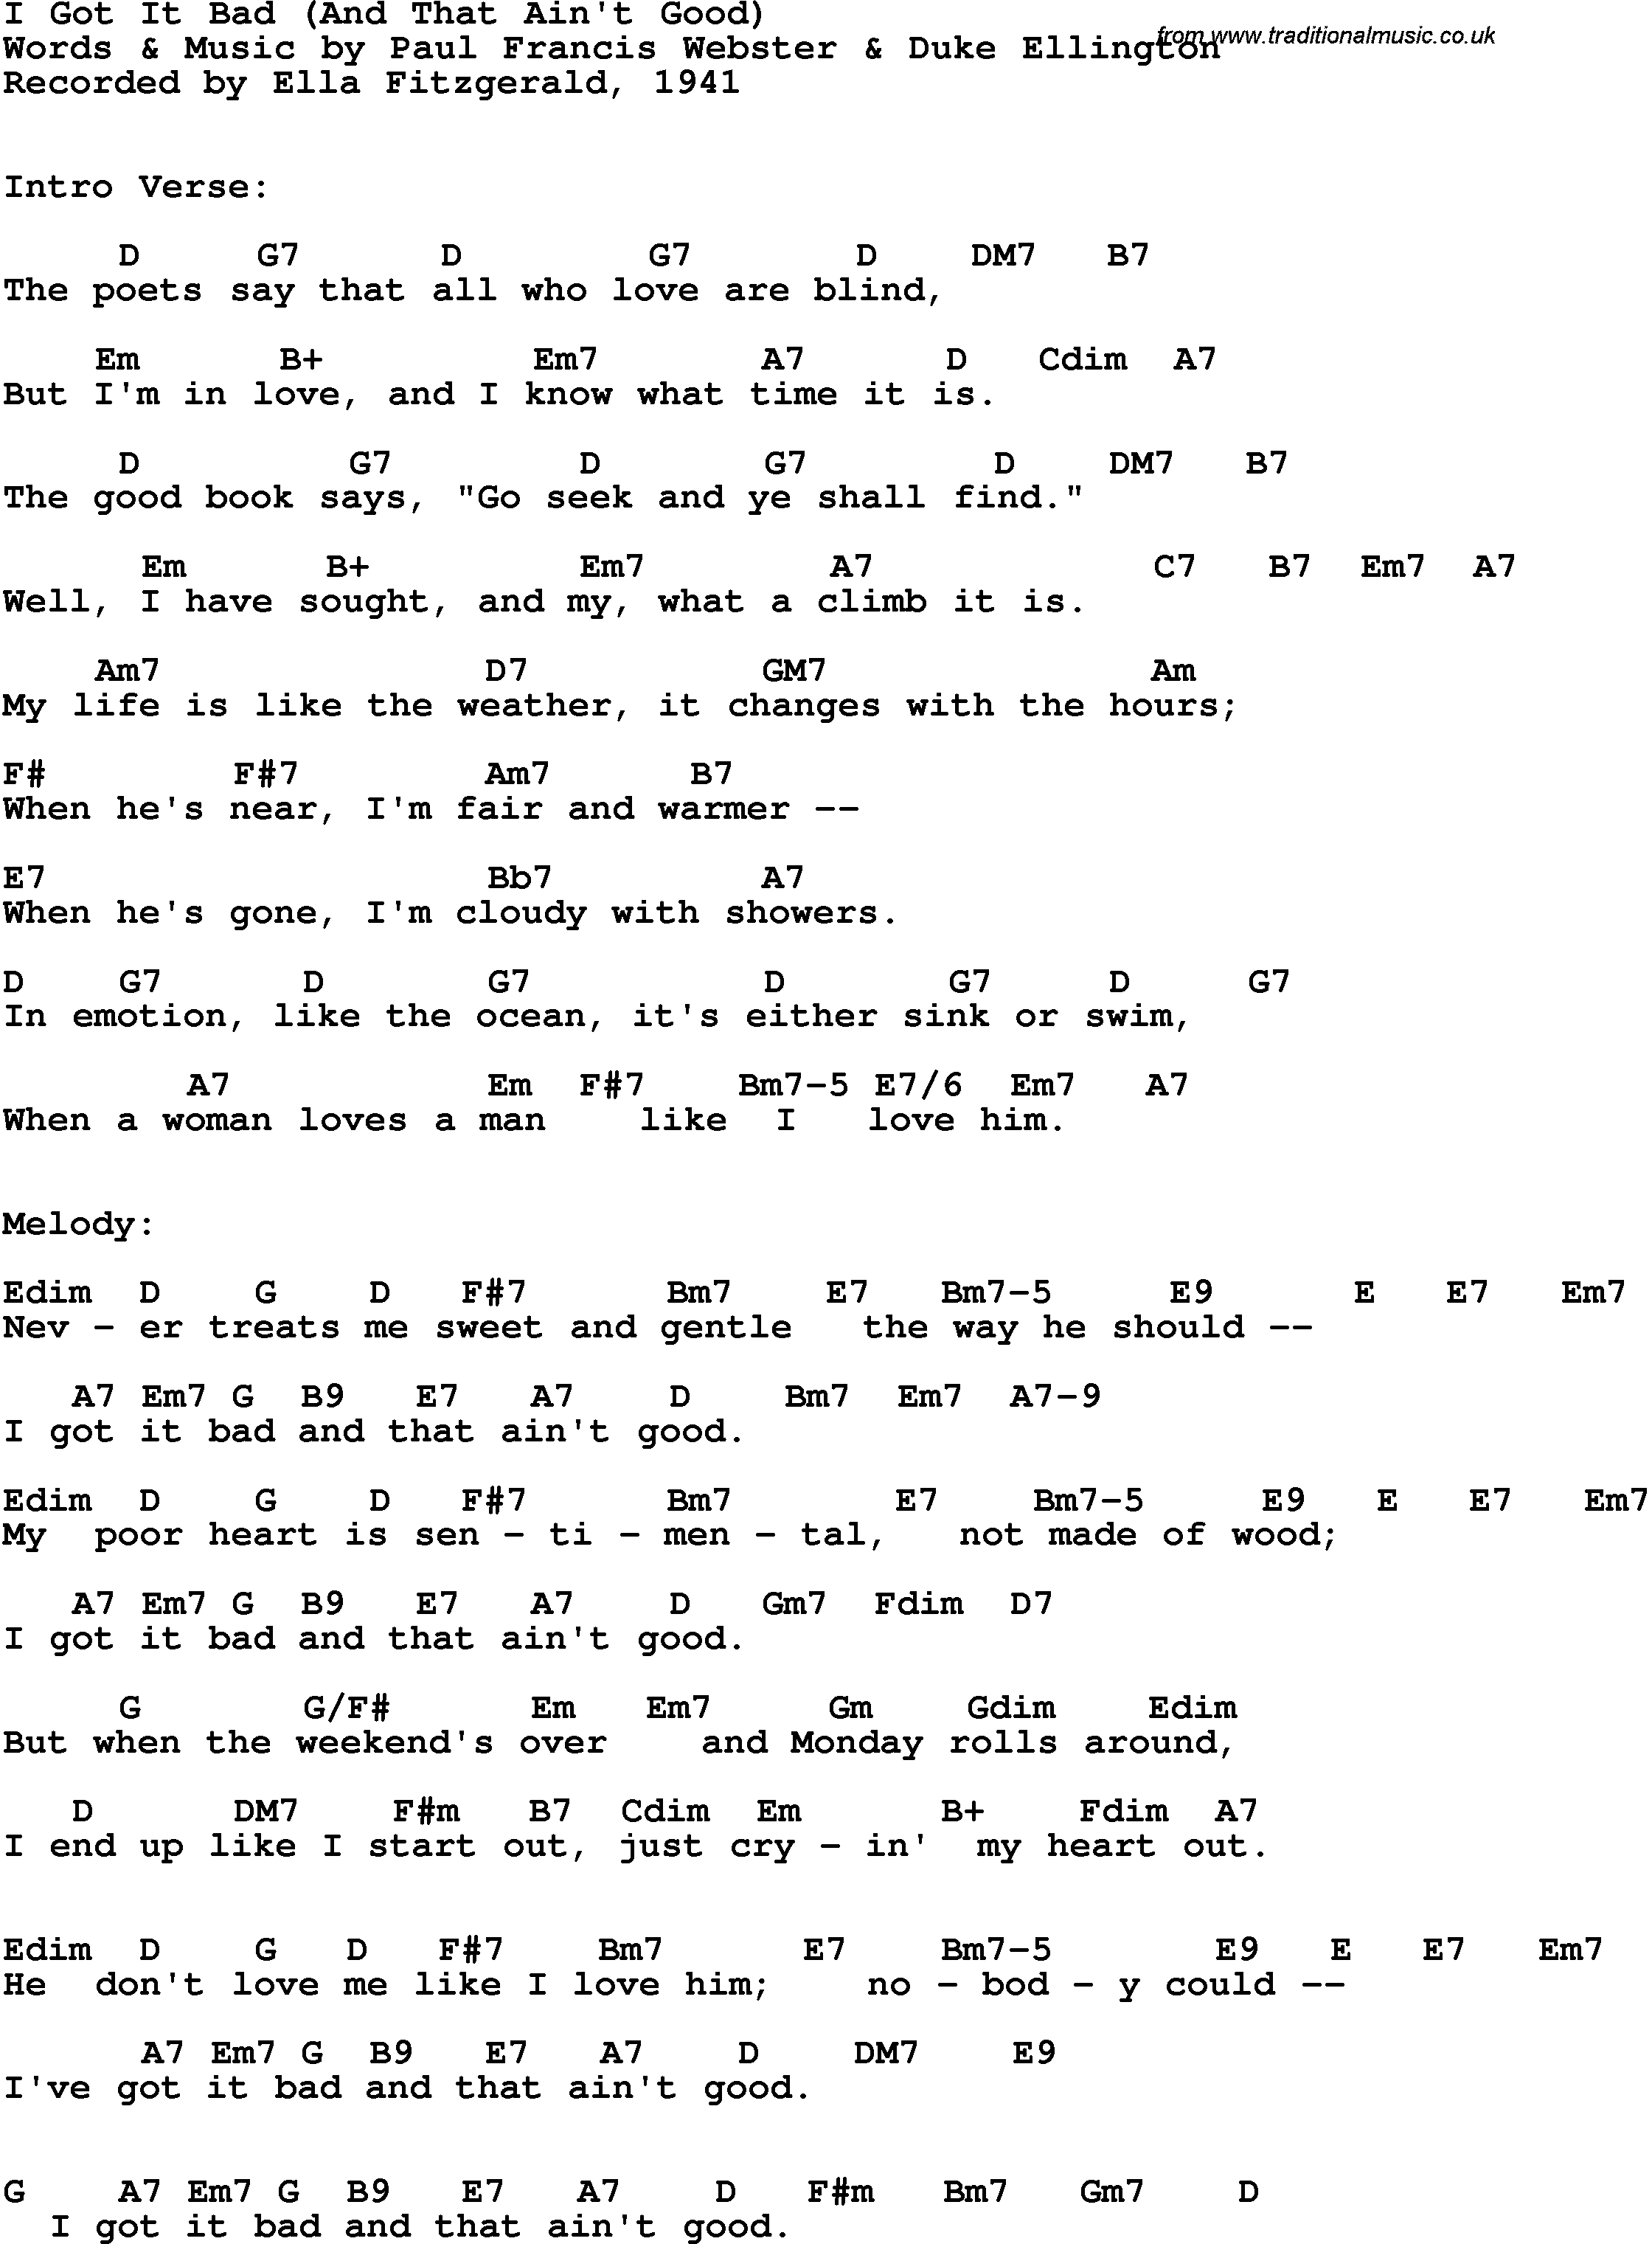 Song Lyrics with guitar chords for I've Got It Bad (And That Ain't Good) - Ella Fitzgerald, 1941